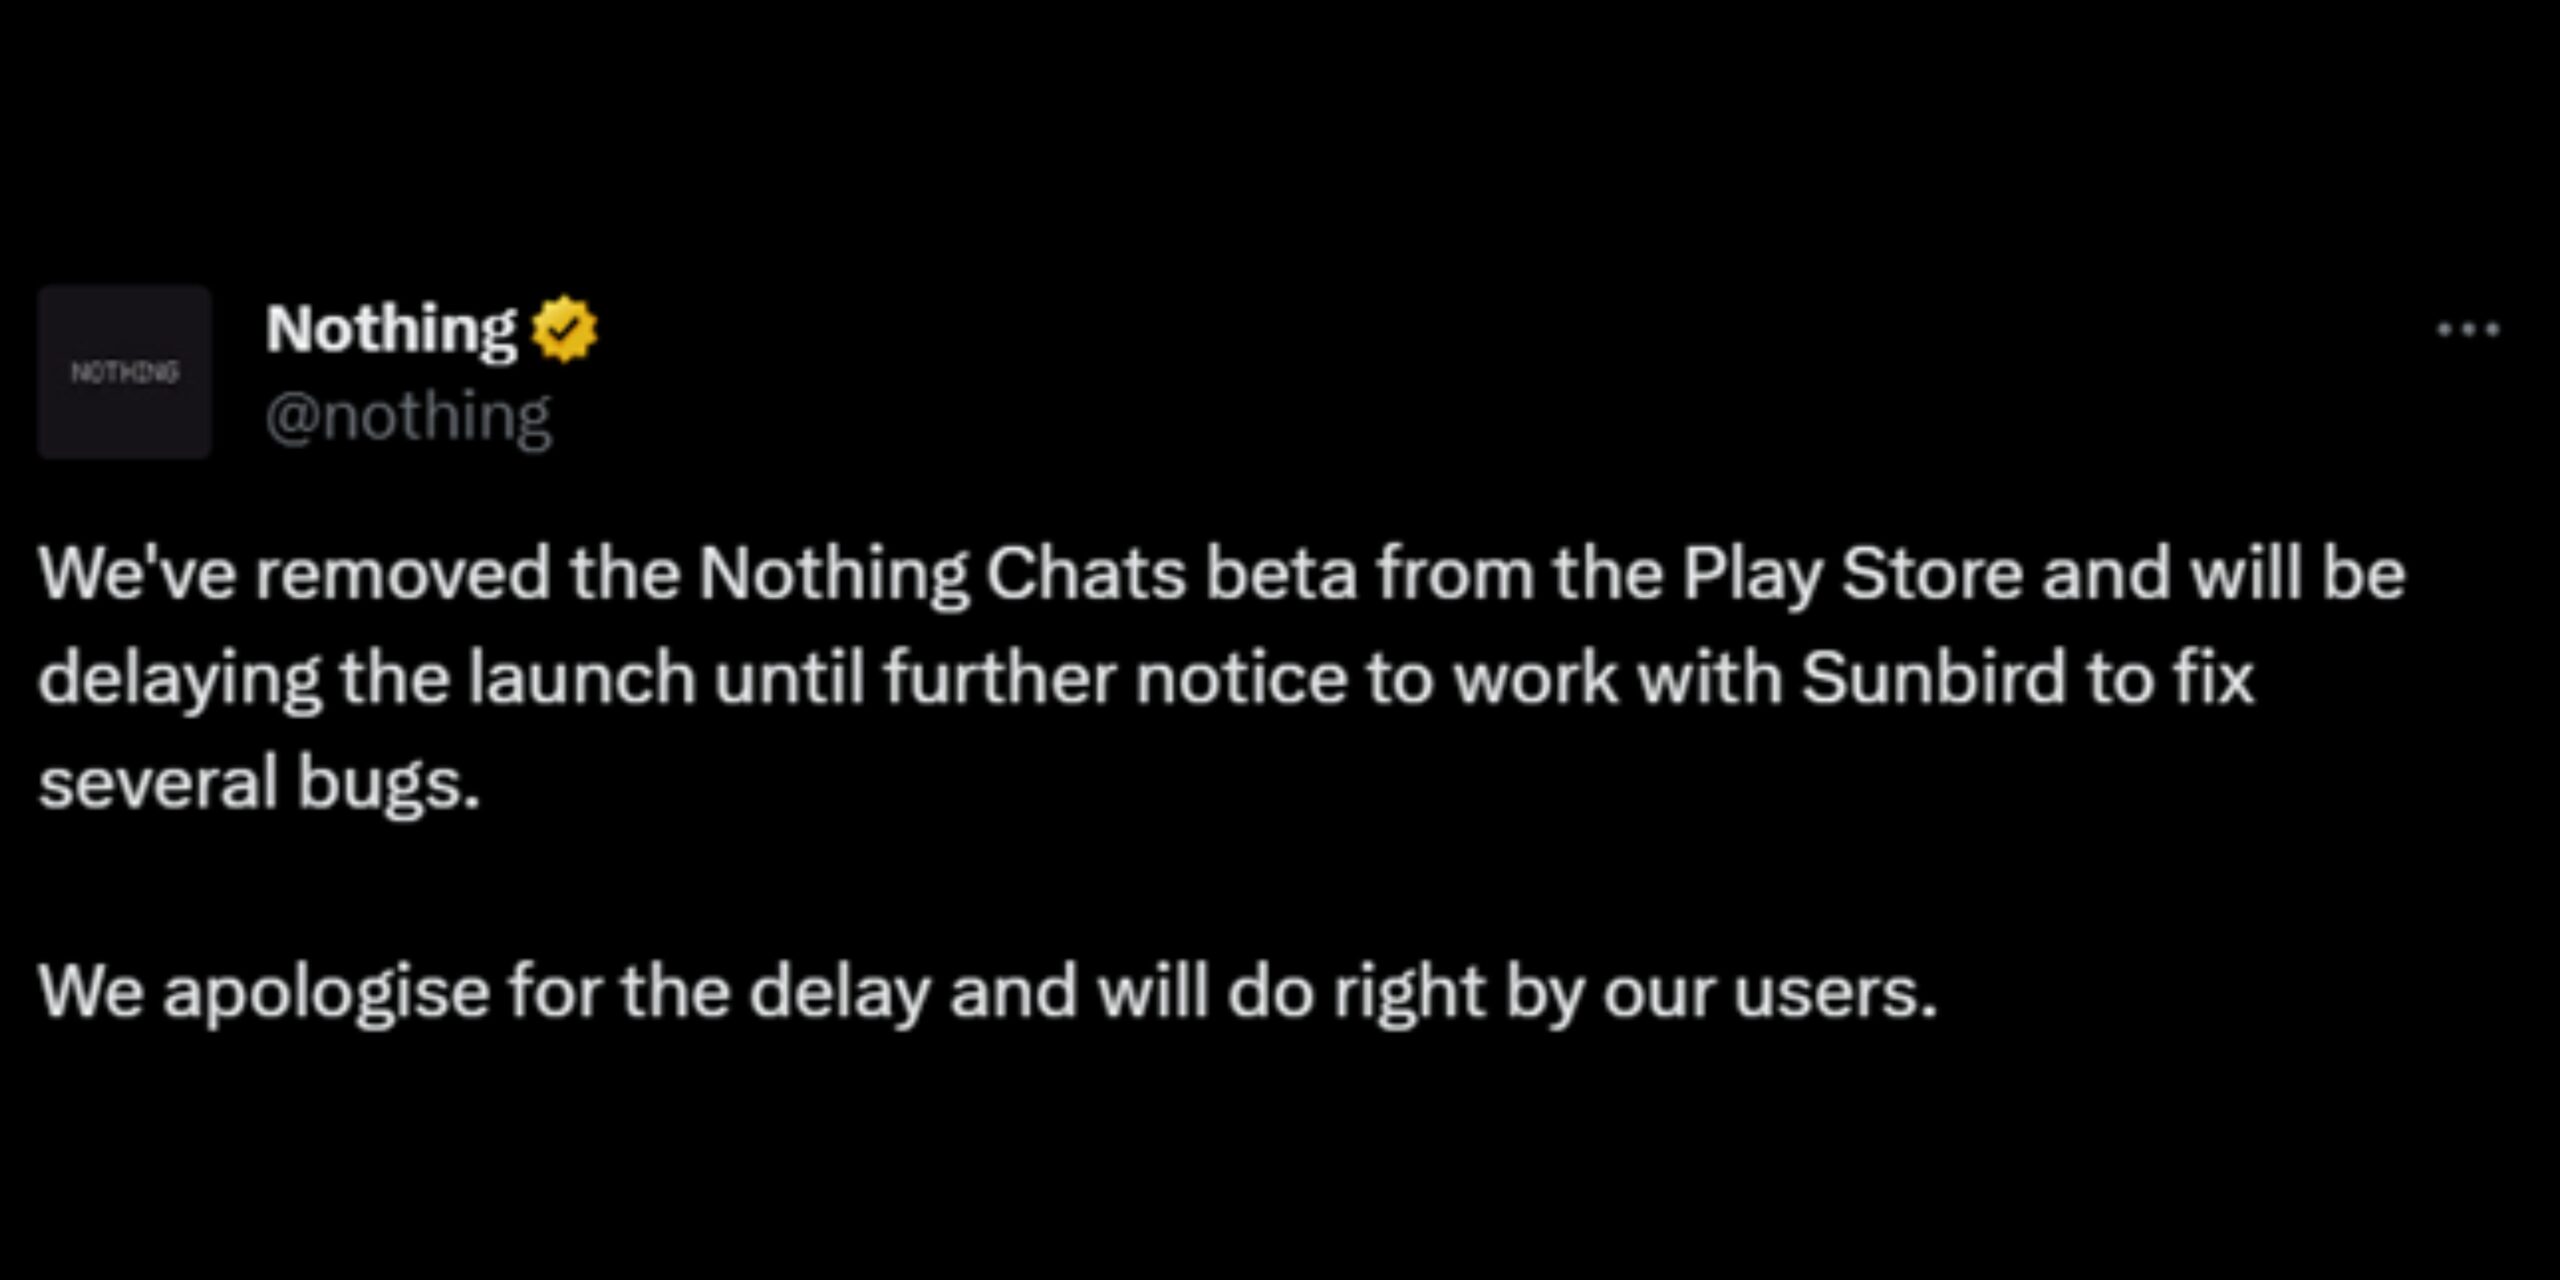 Nothing’s Chat app was pulled from the Google Play Store